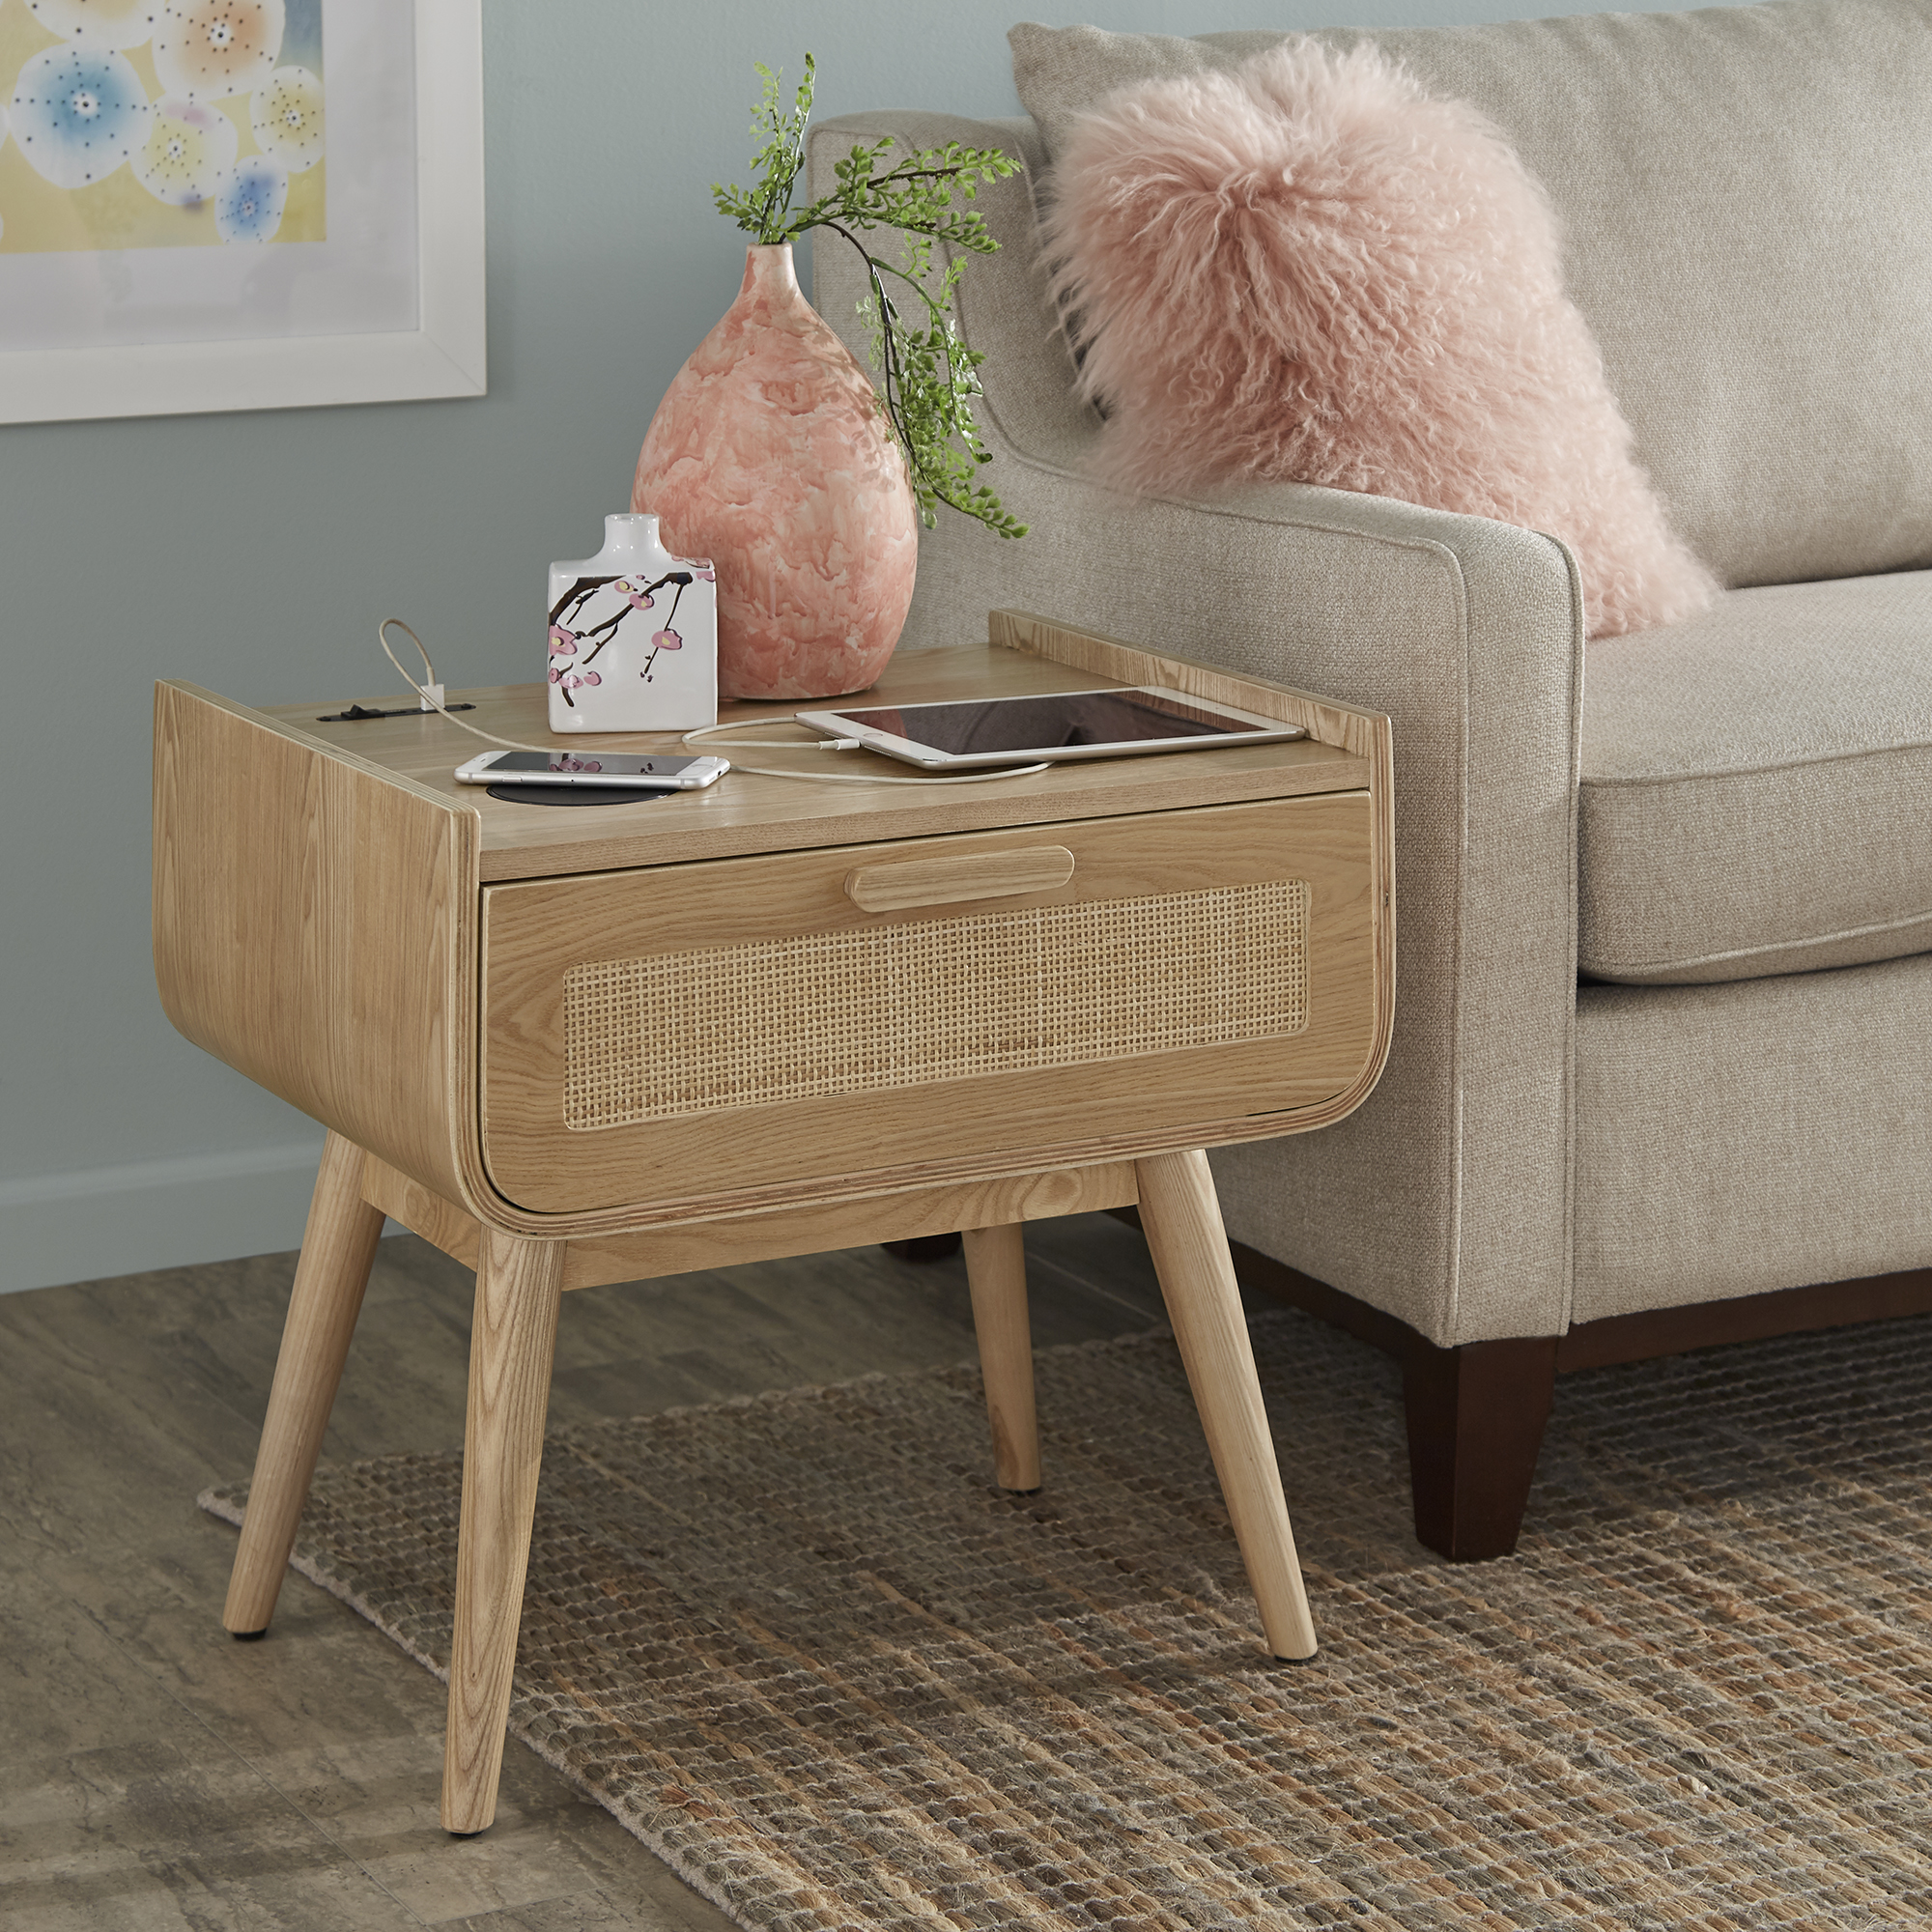 Natural Finish End Table With Wicker Drawer Front & Wireless Charger